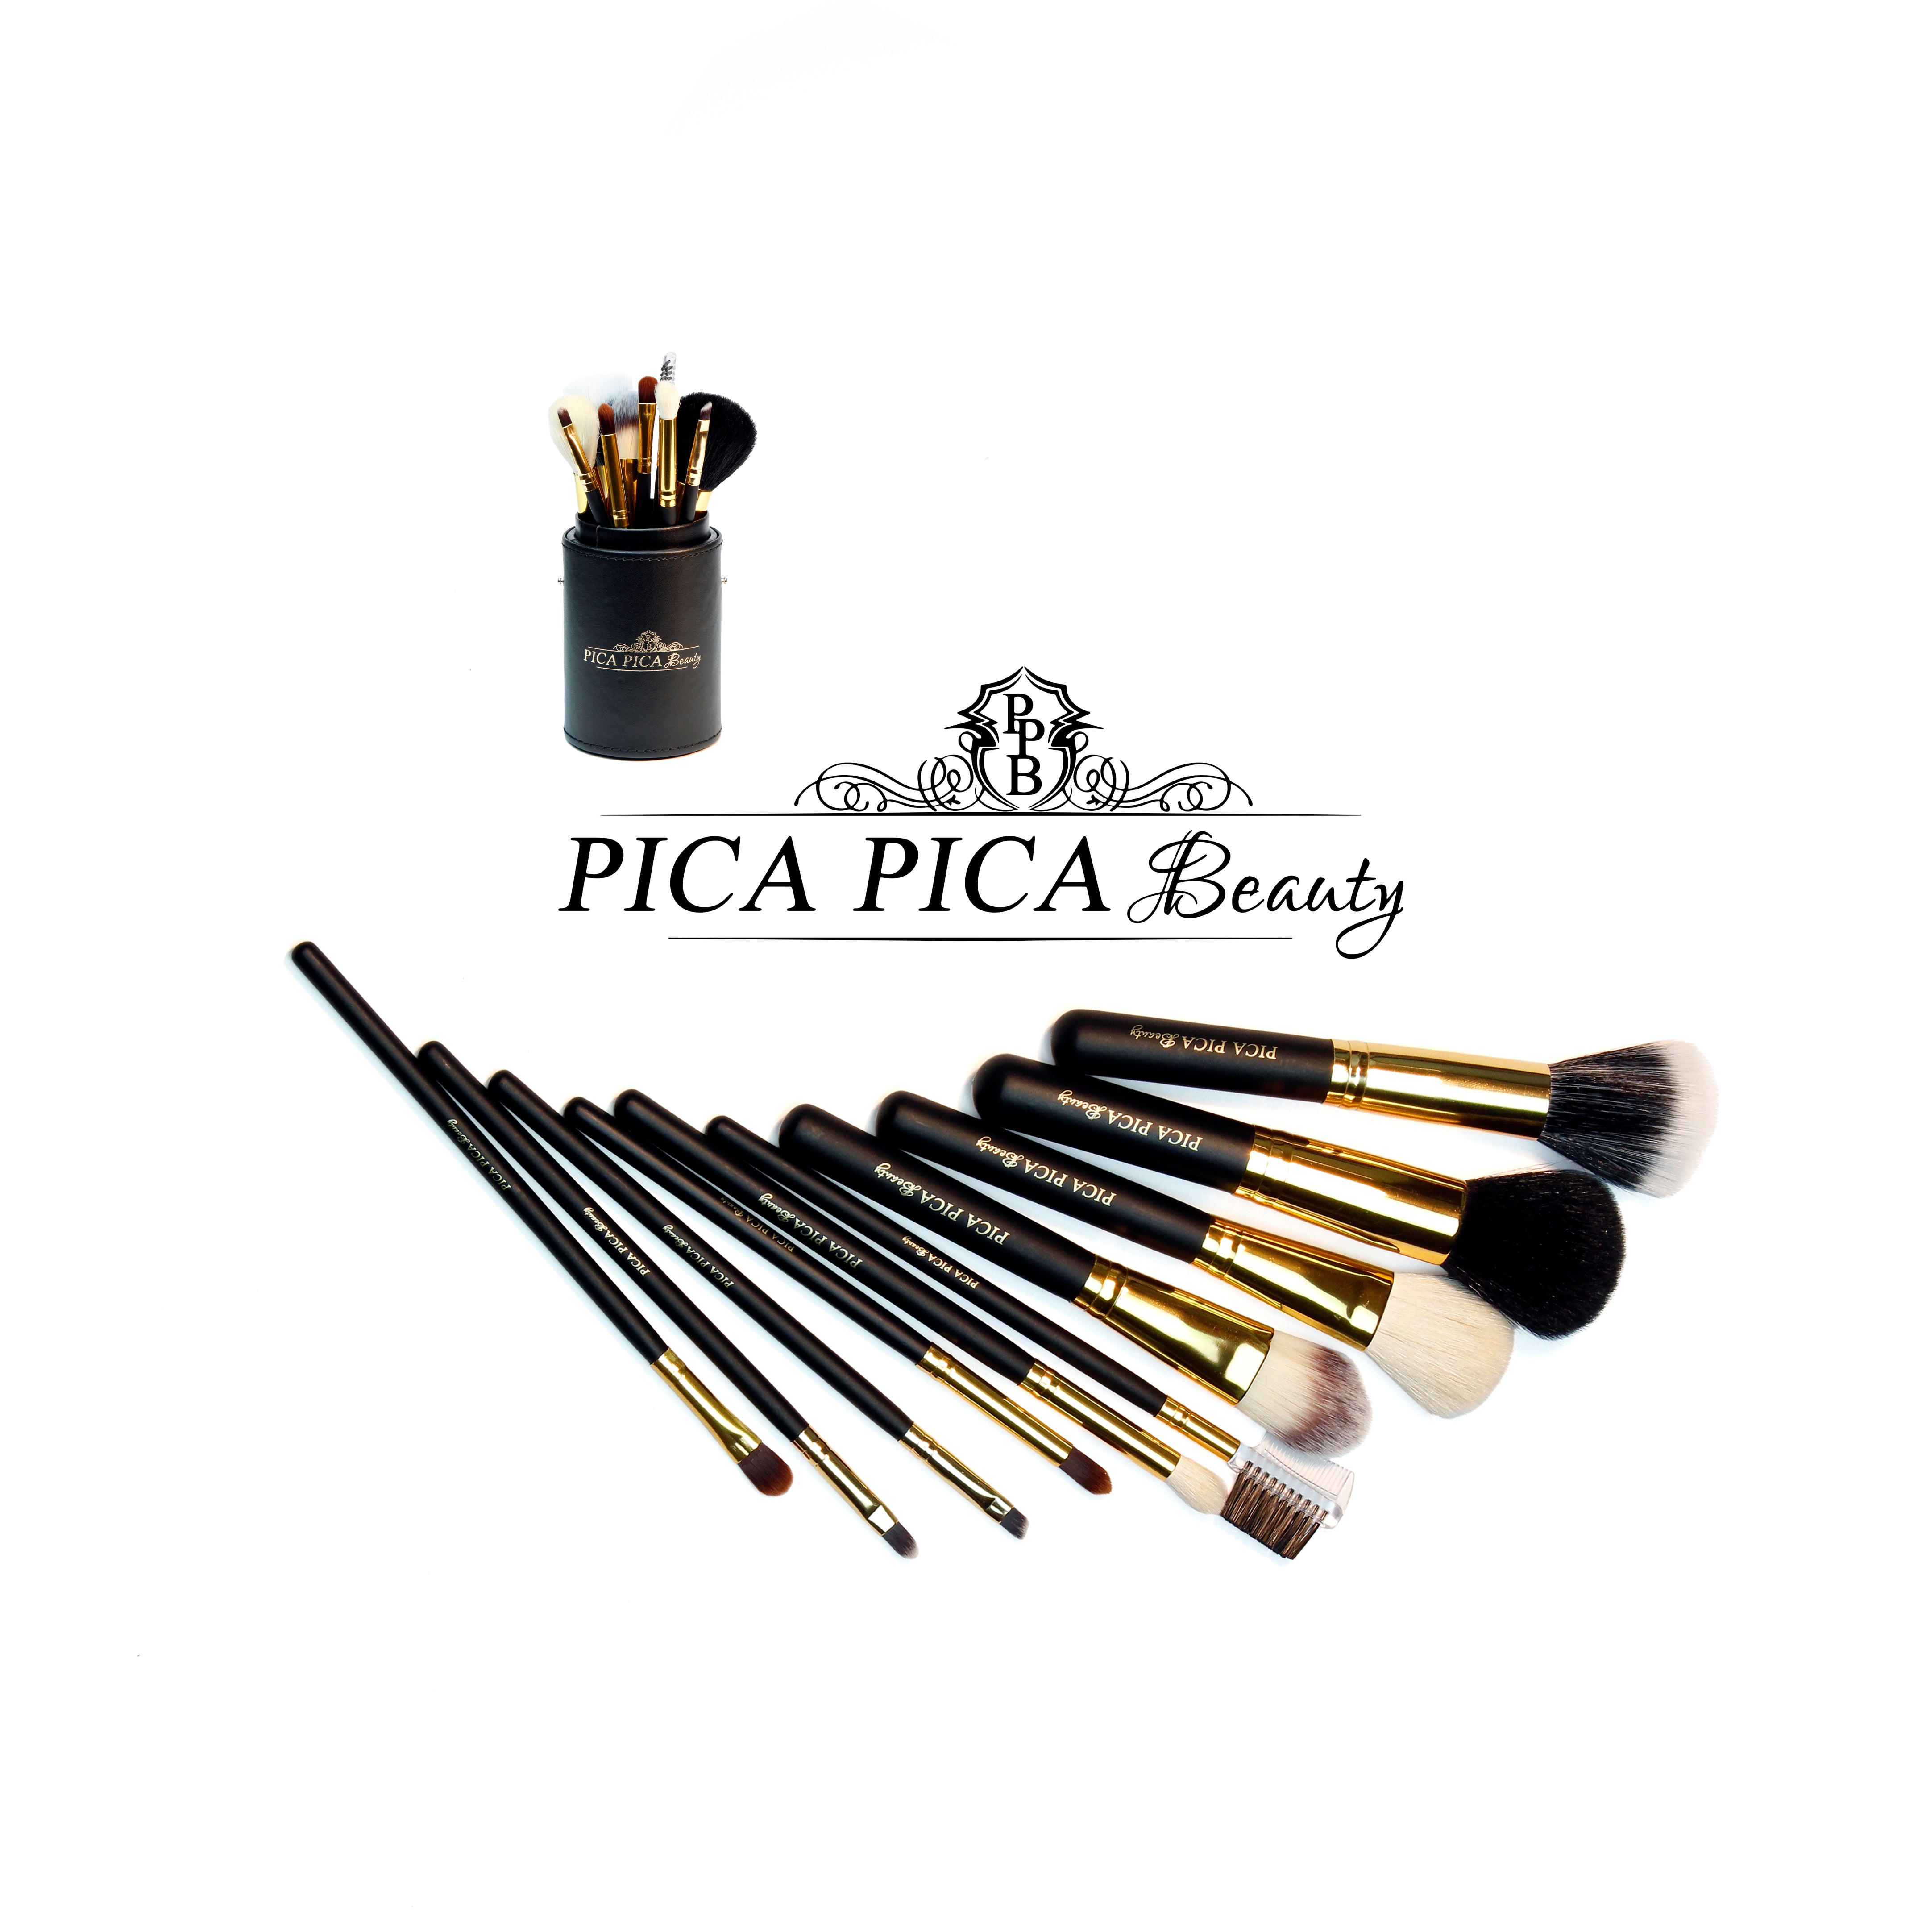 LIMITED EDITION Pica Pica Beauty All-IN Bundle Set - PicaPicaBeauty 